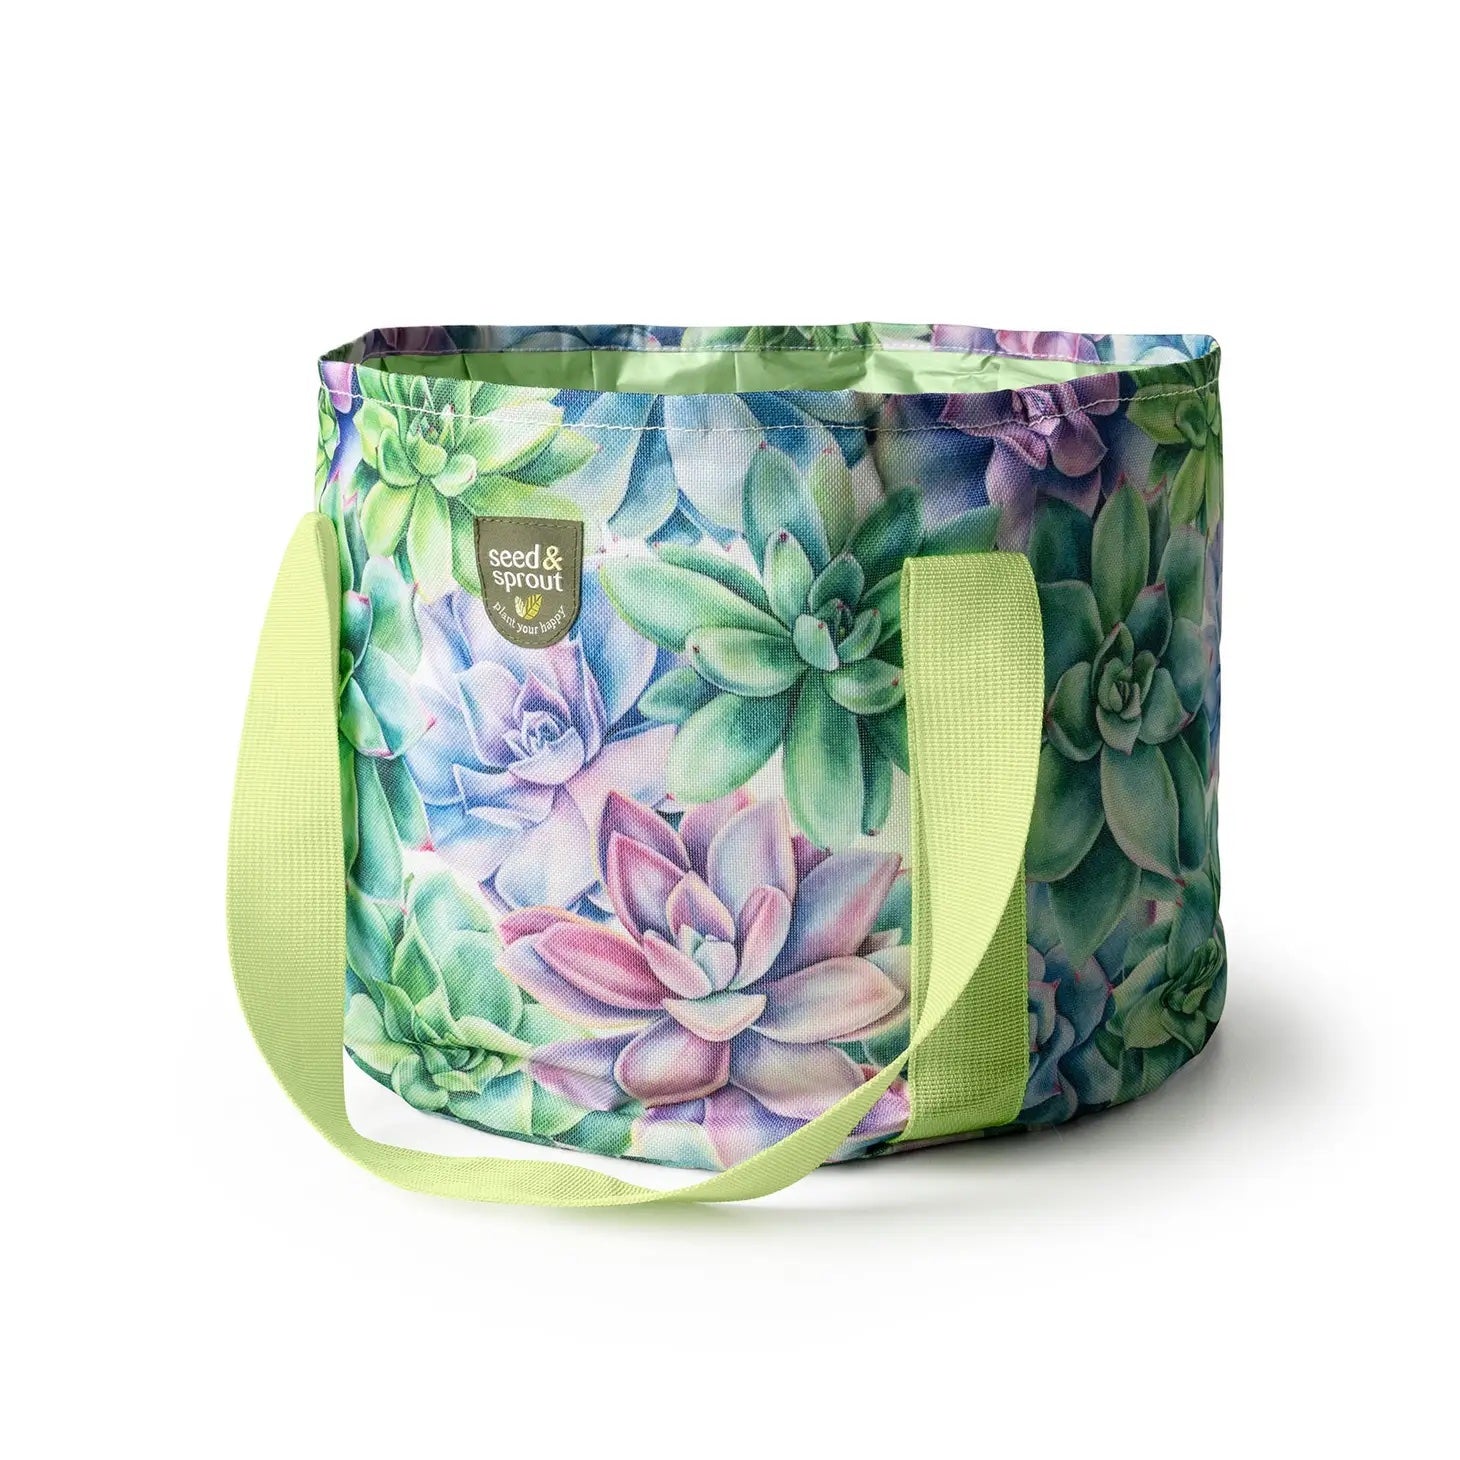 Simply Succulent foldable gardening bucket